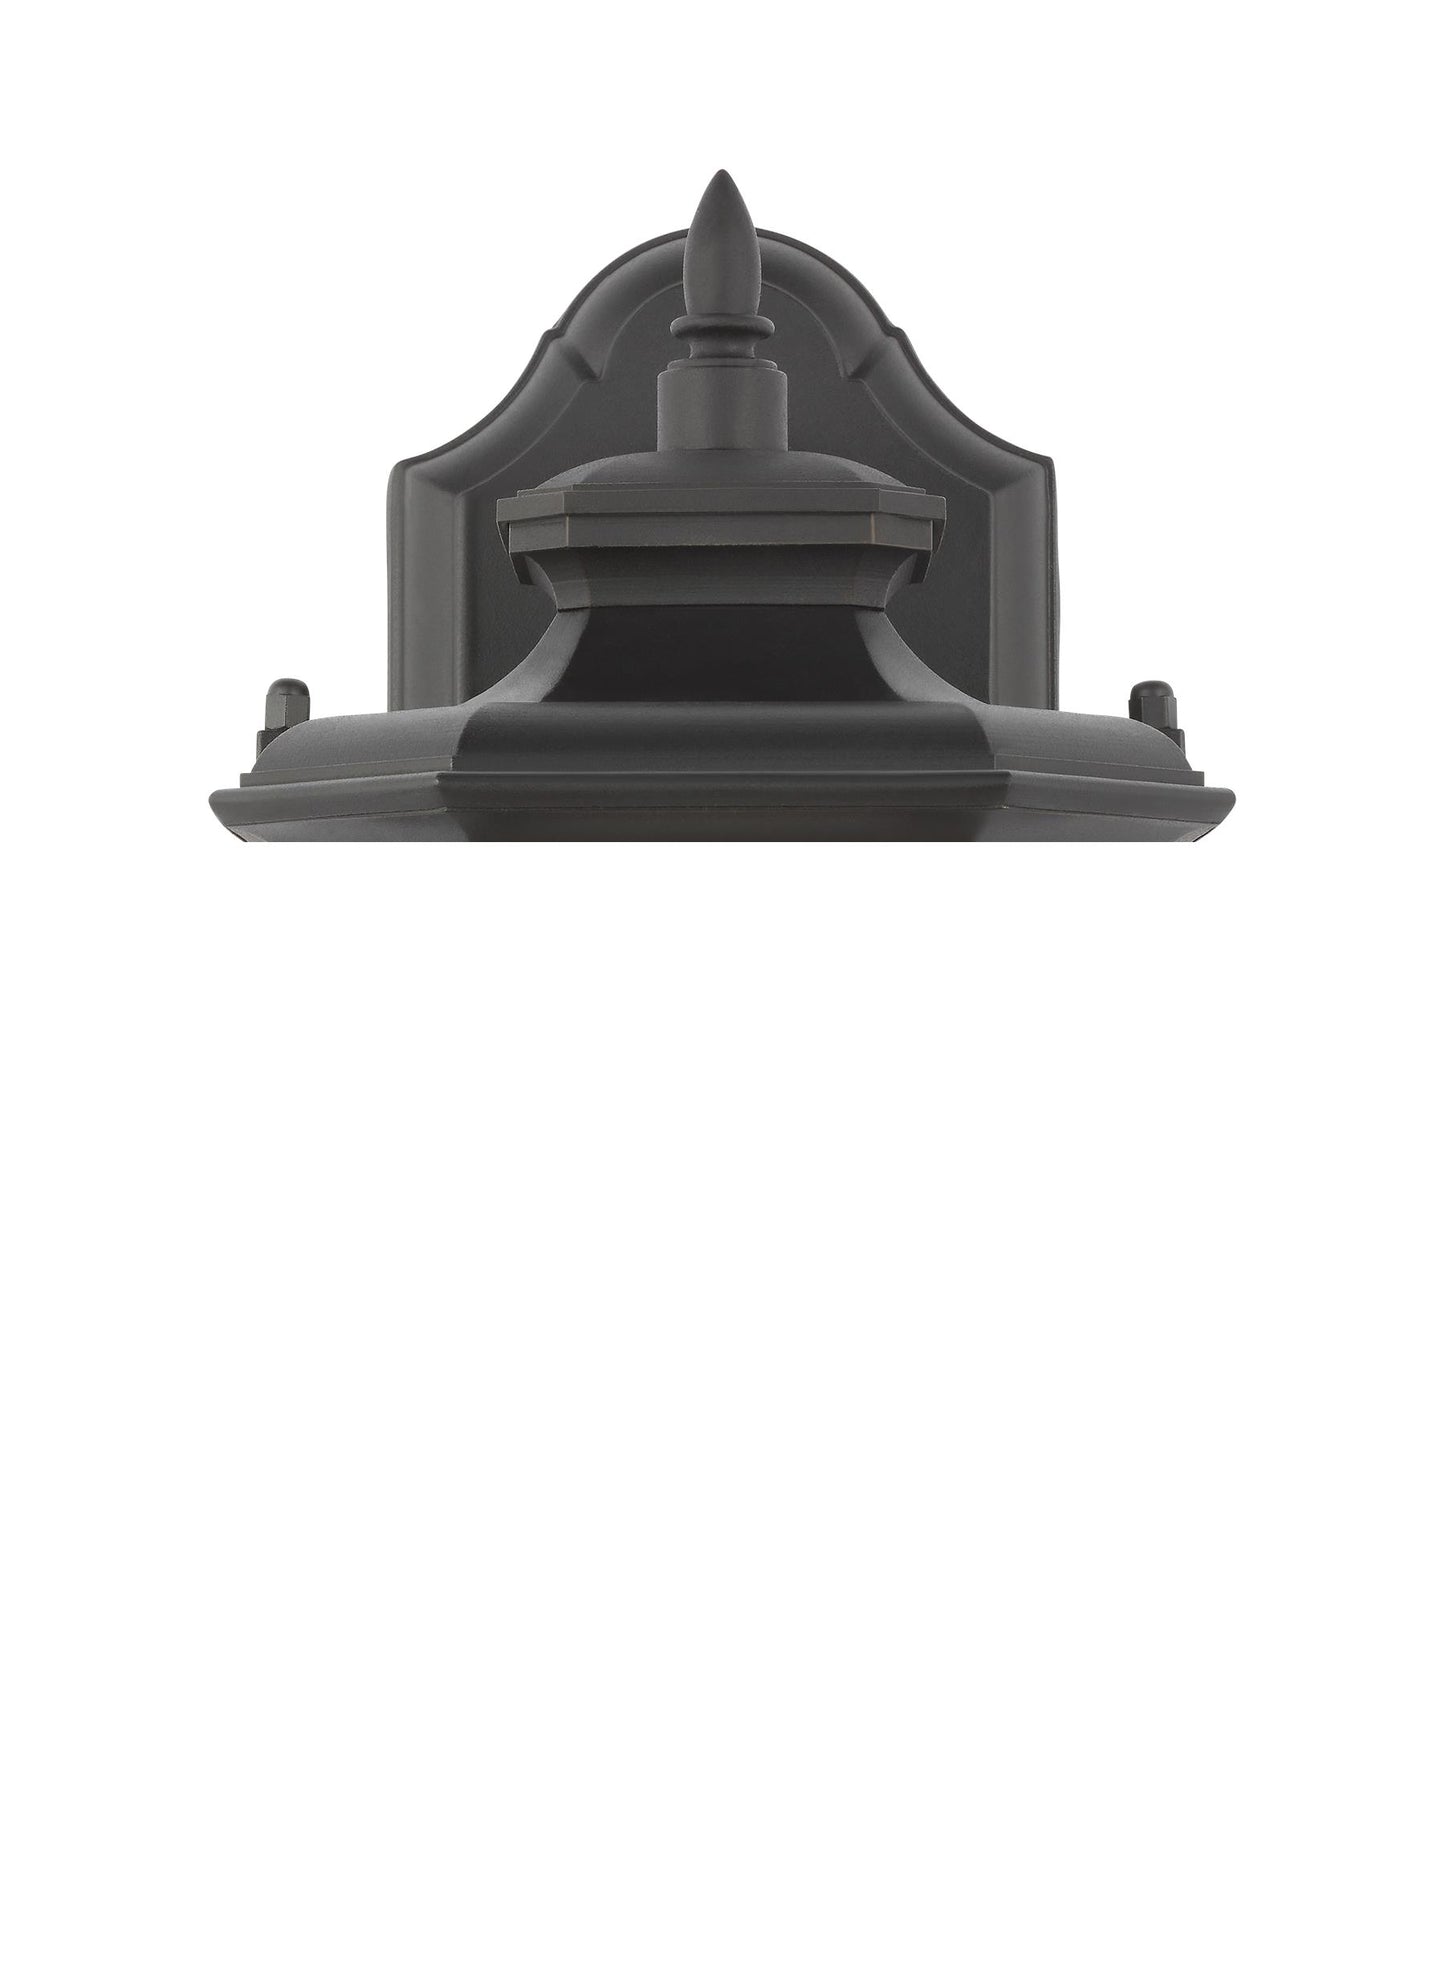 Childress traditional 1-light outdoor exterior extra small outdoor wall lantern sconce in black finish with satin etched g...